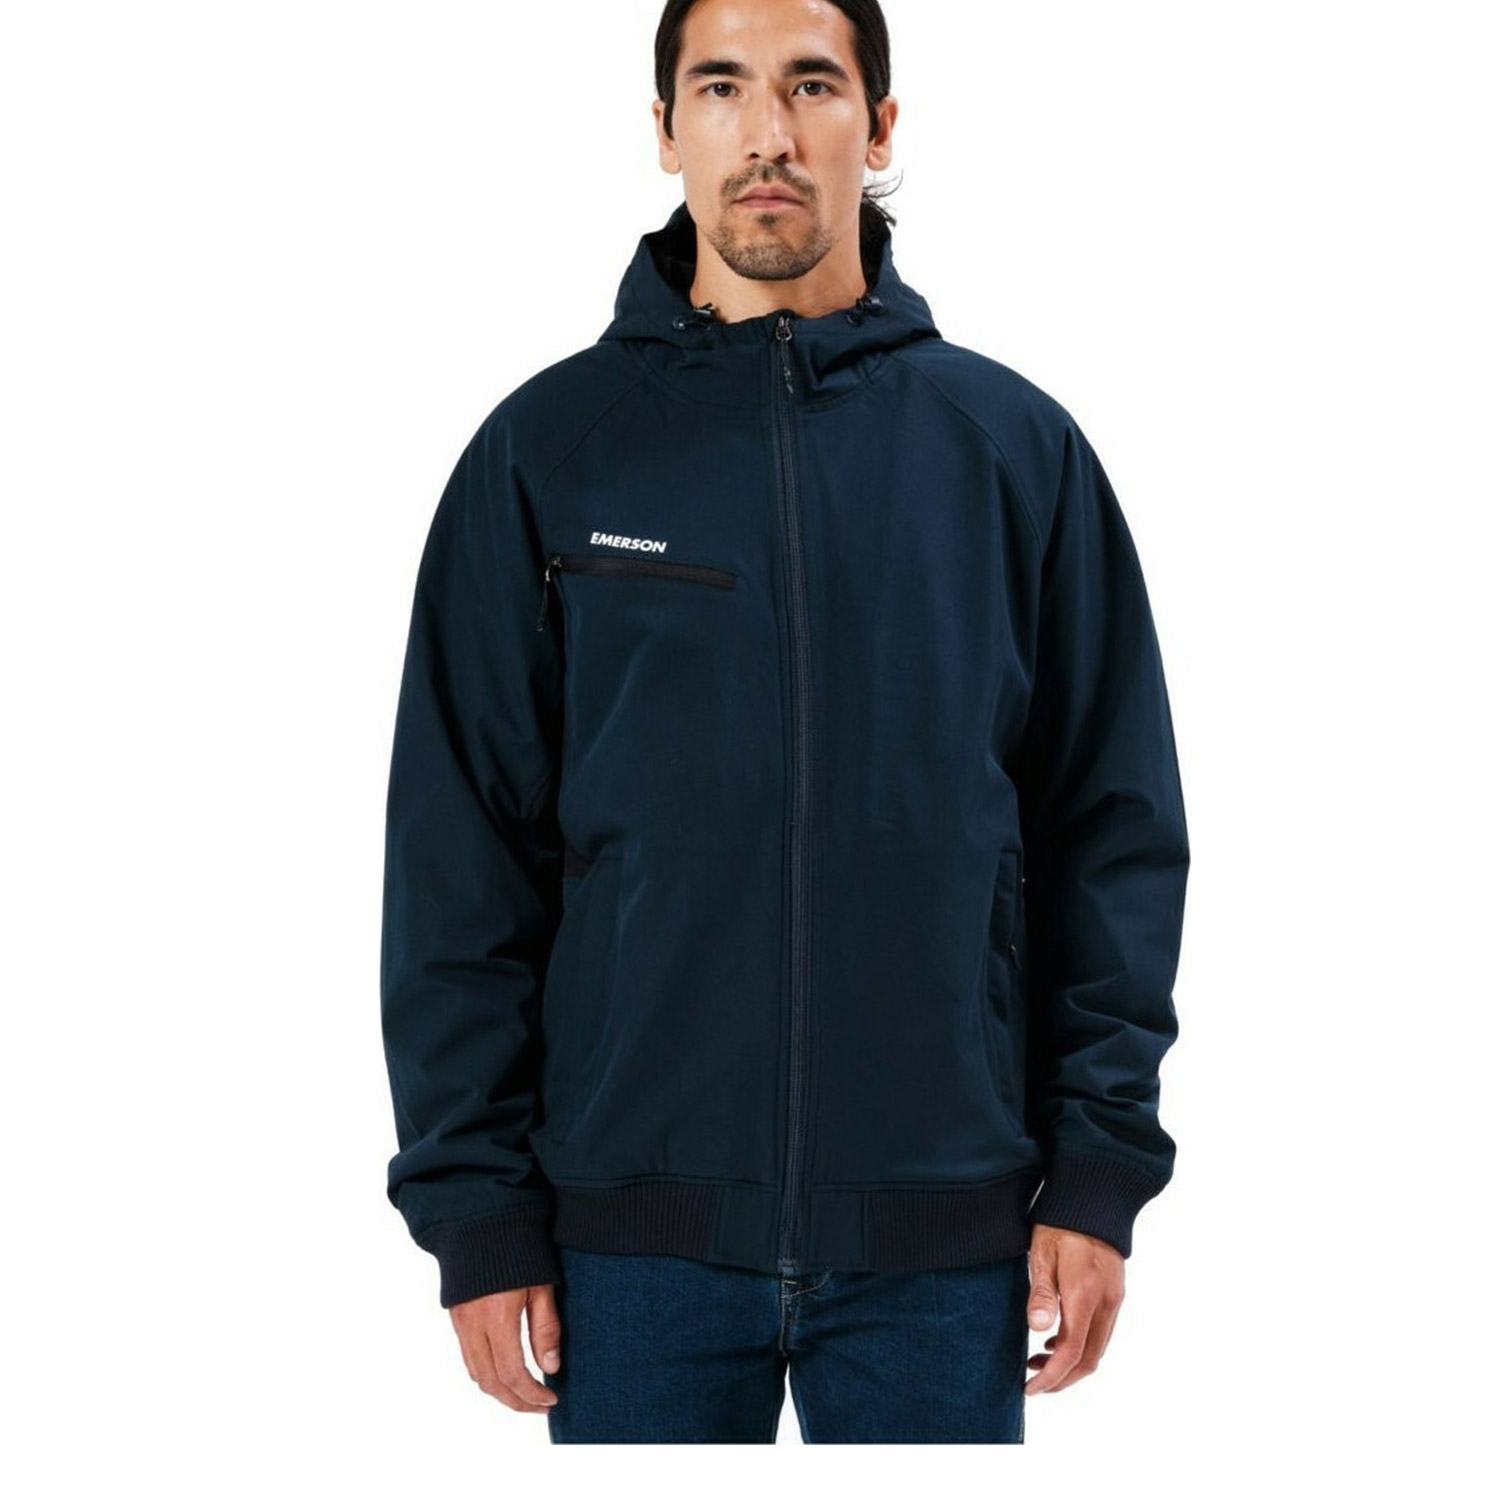 Emerson M Soft Shell Ribbed Jacket With Hood (212.EM11.40-BD Navy Blue) 41889